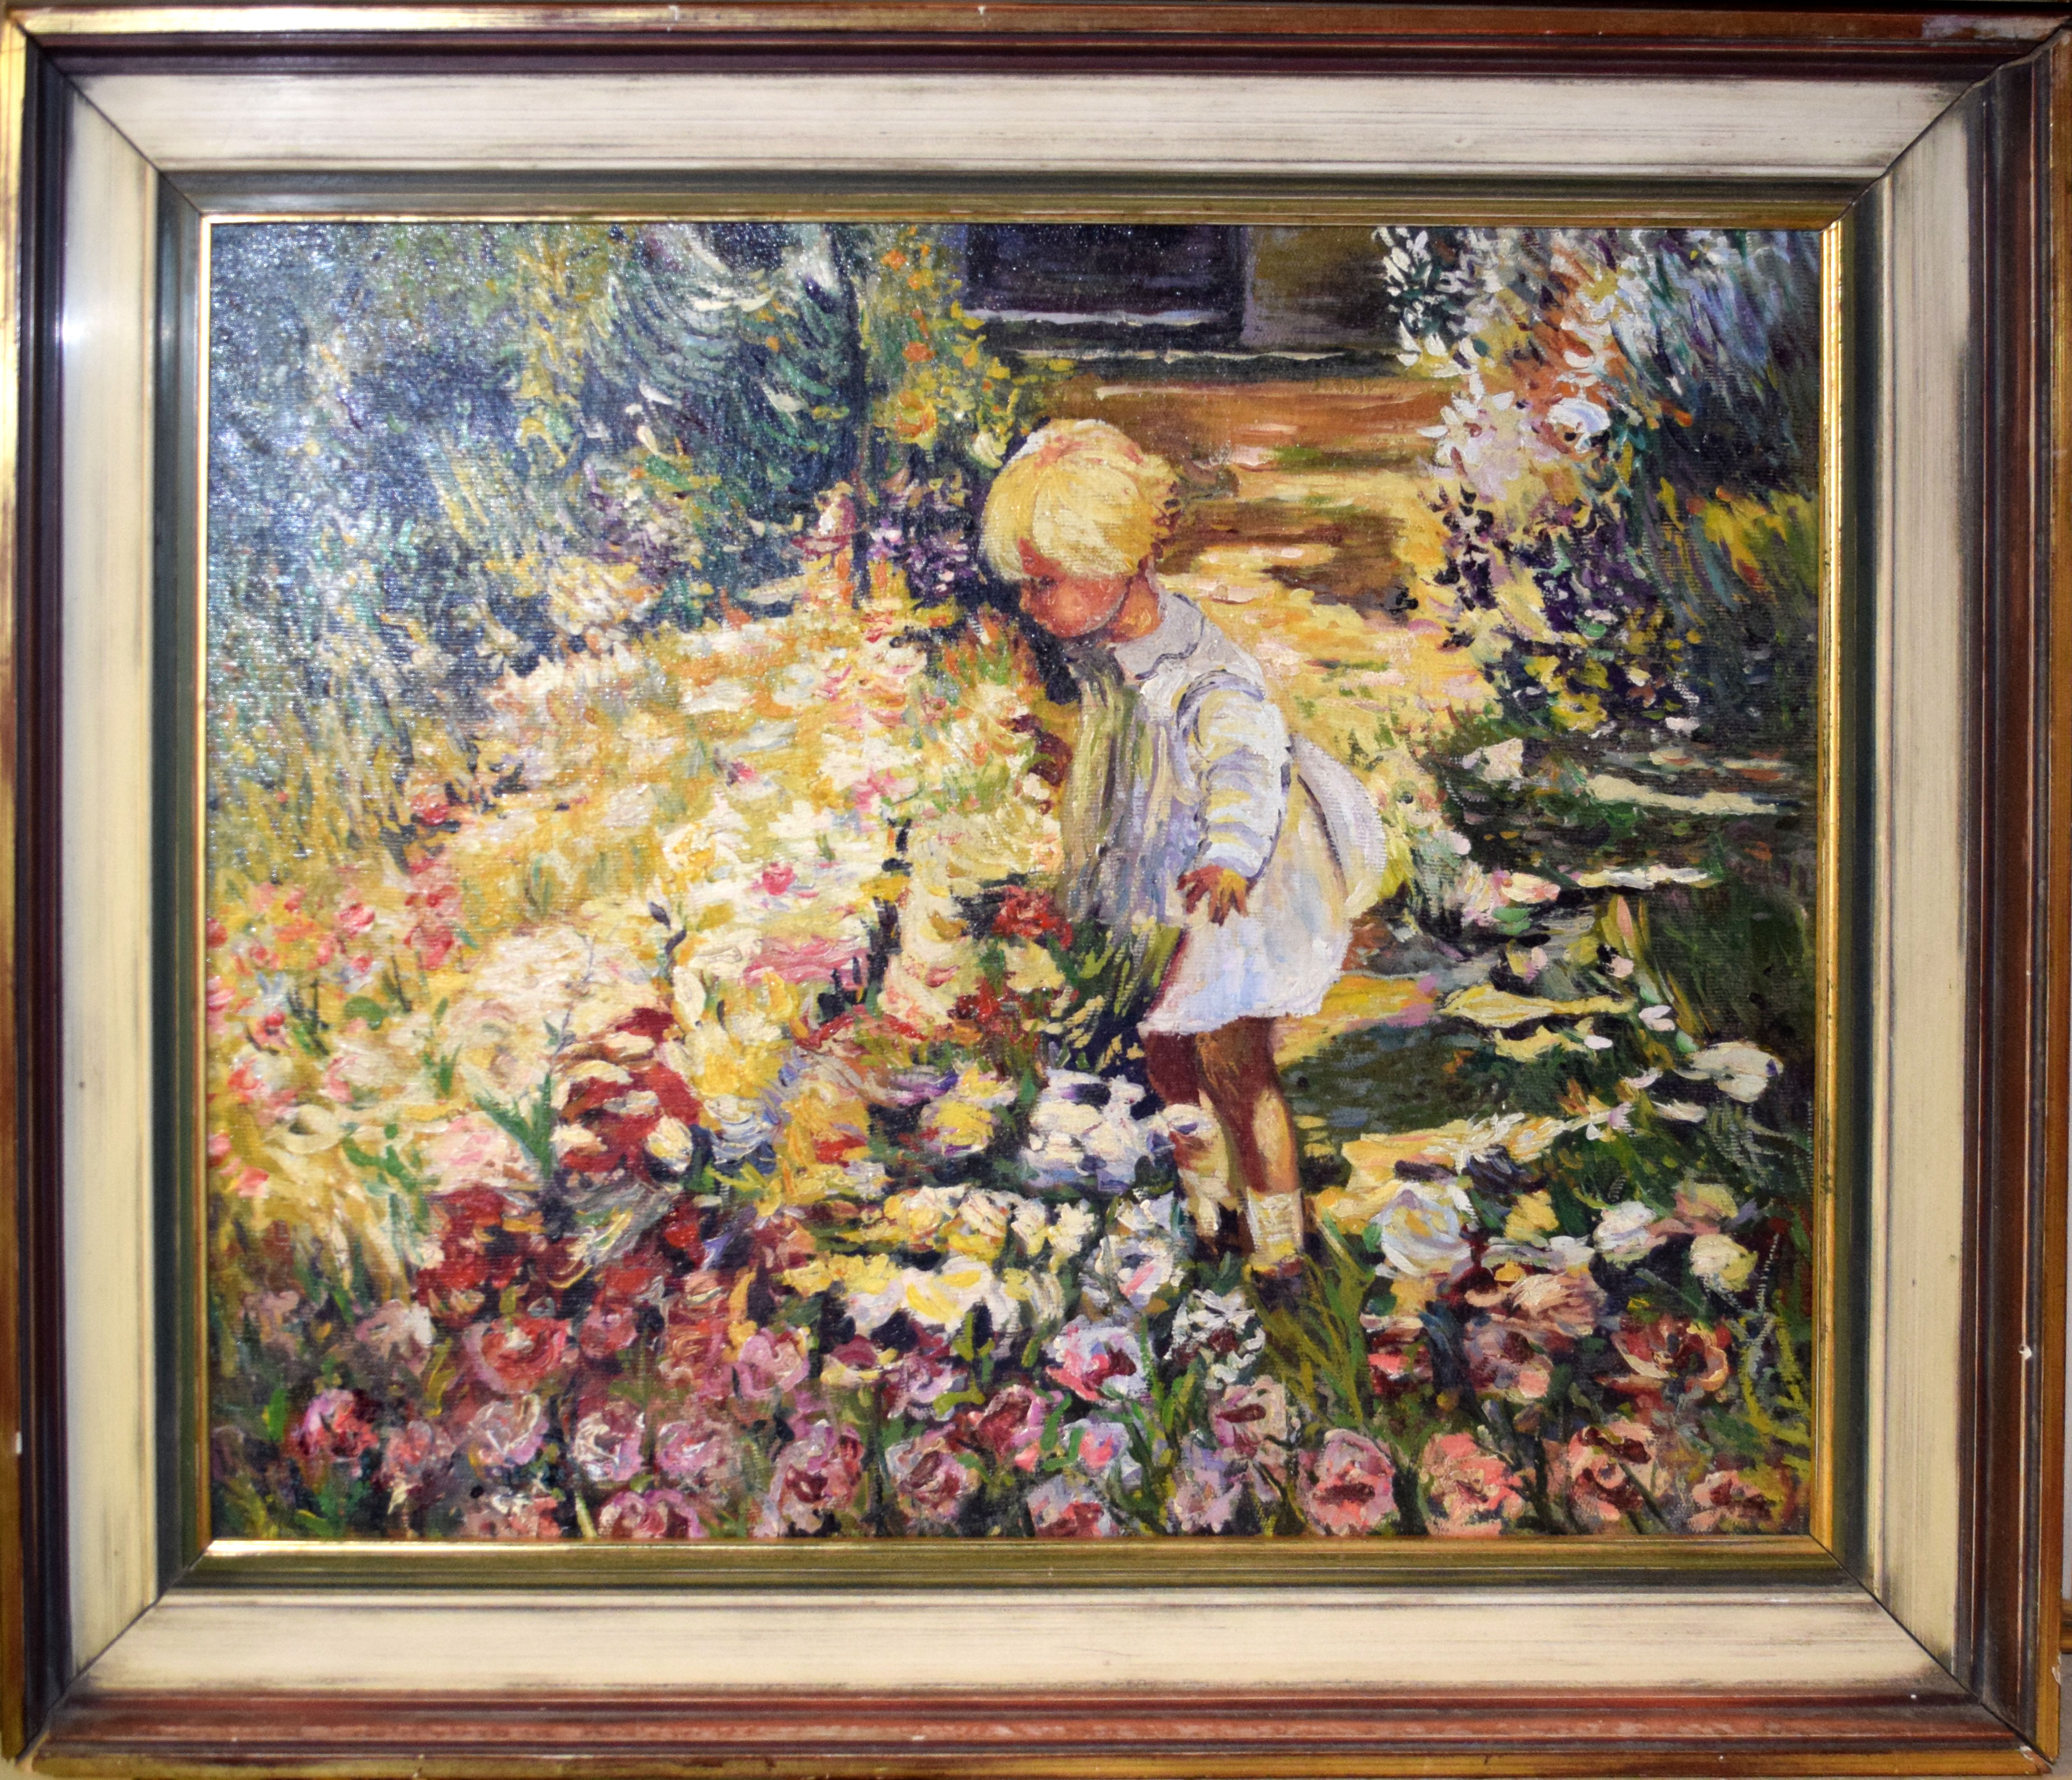 Circle of Dorothea Sharp, "The enchanted garden", oil on board, bears signature and inscription